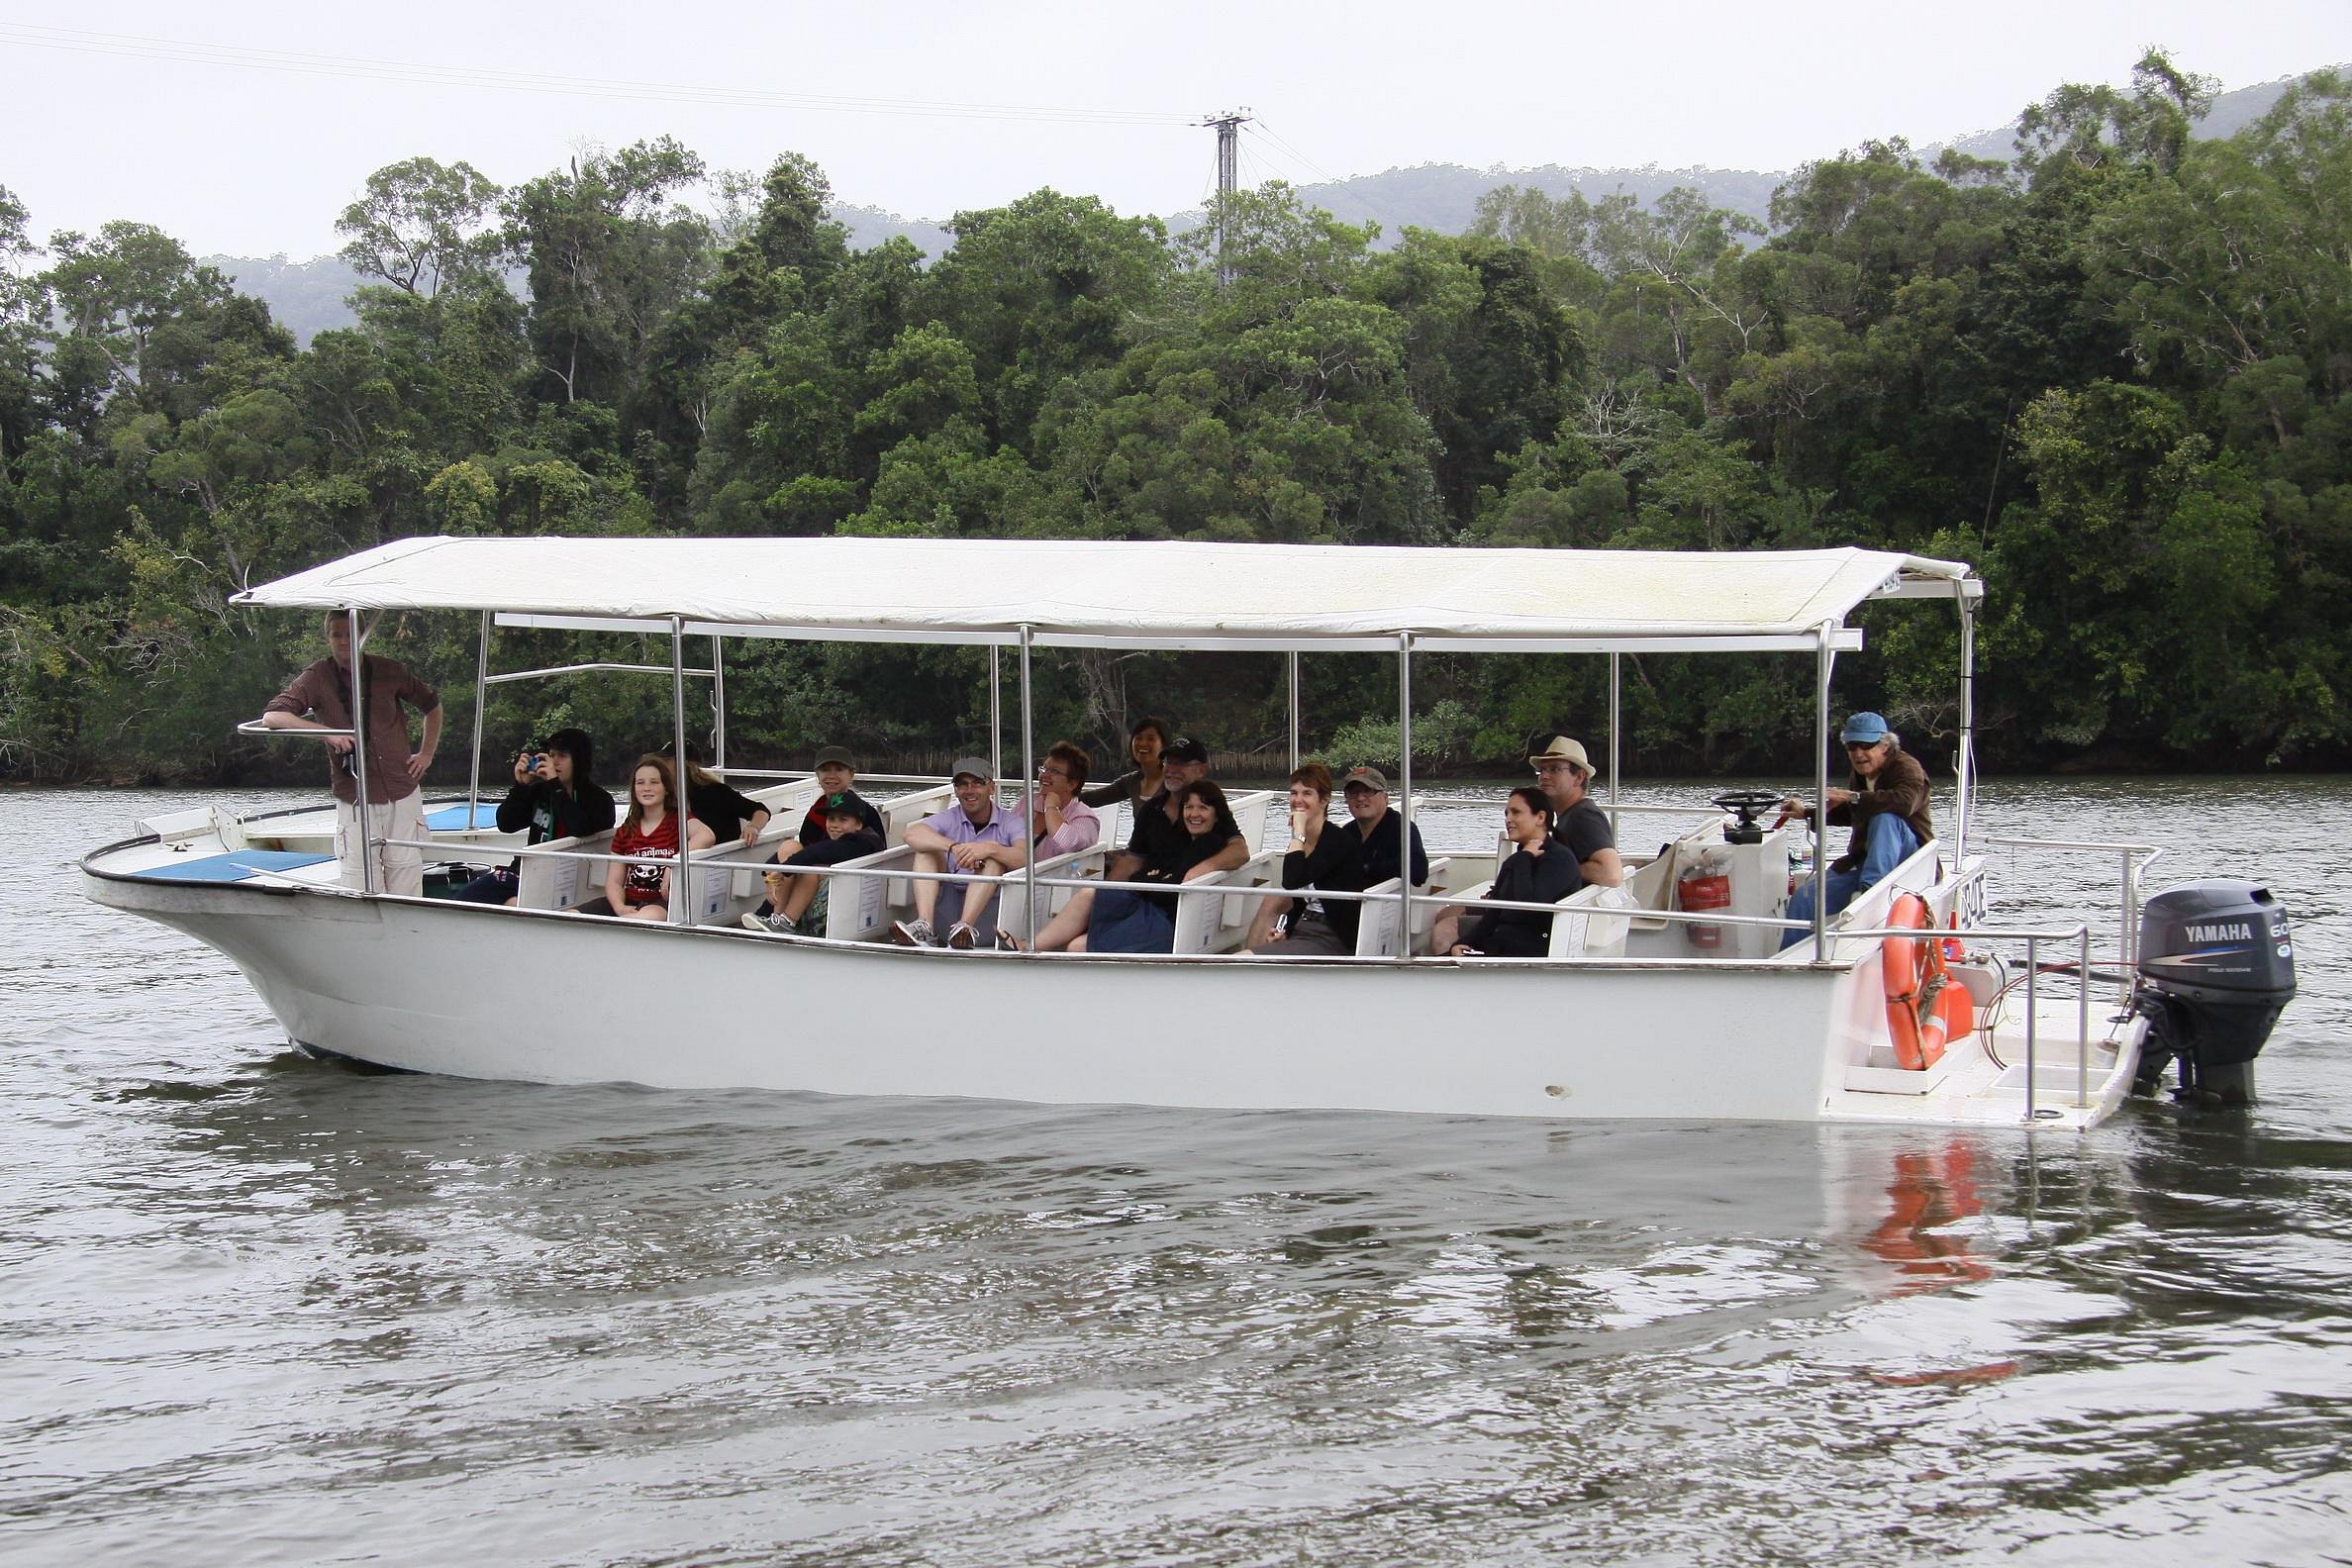 daintree river cruise experience